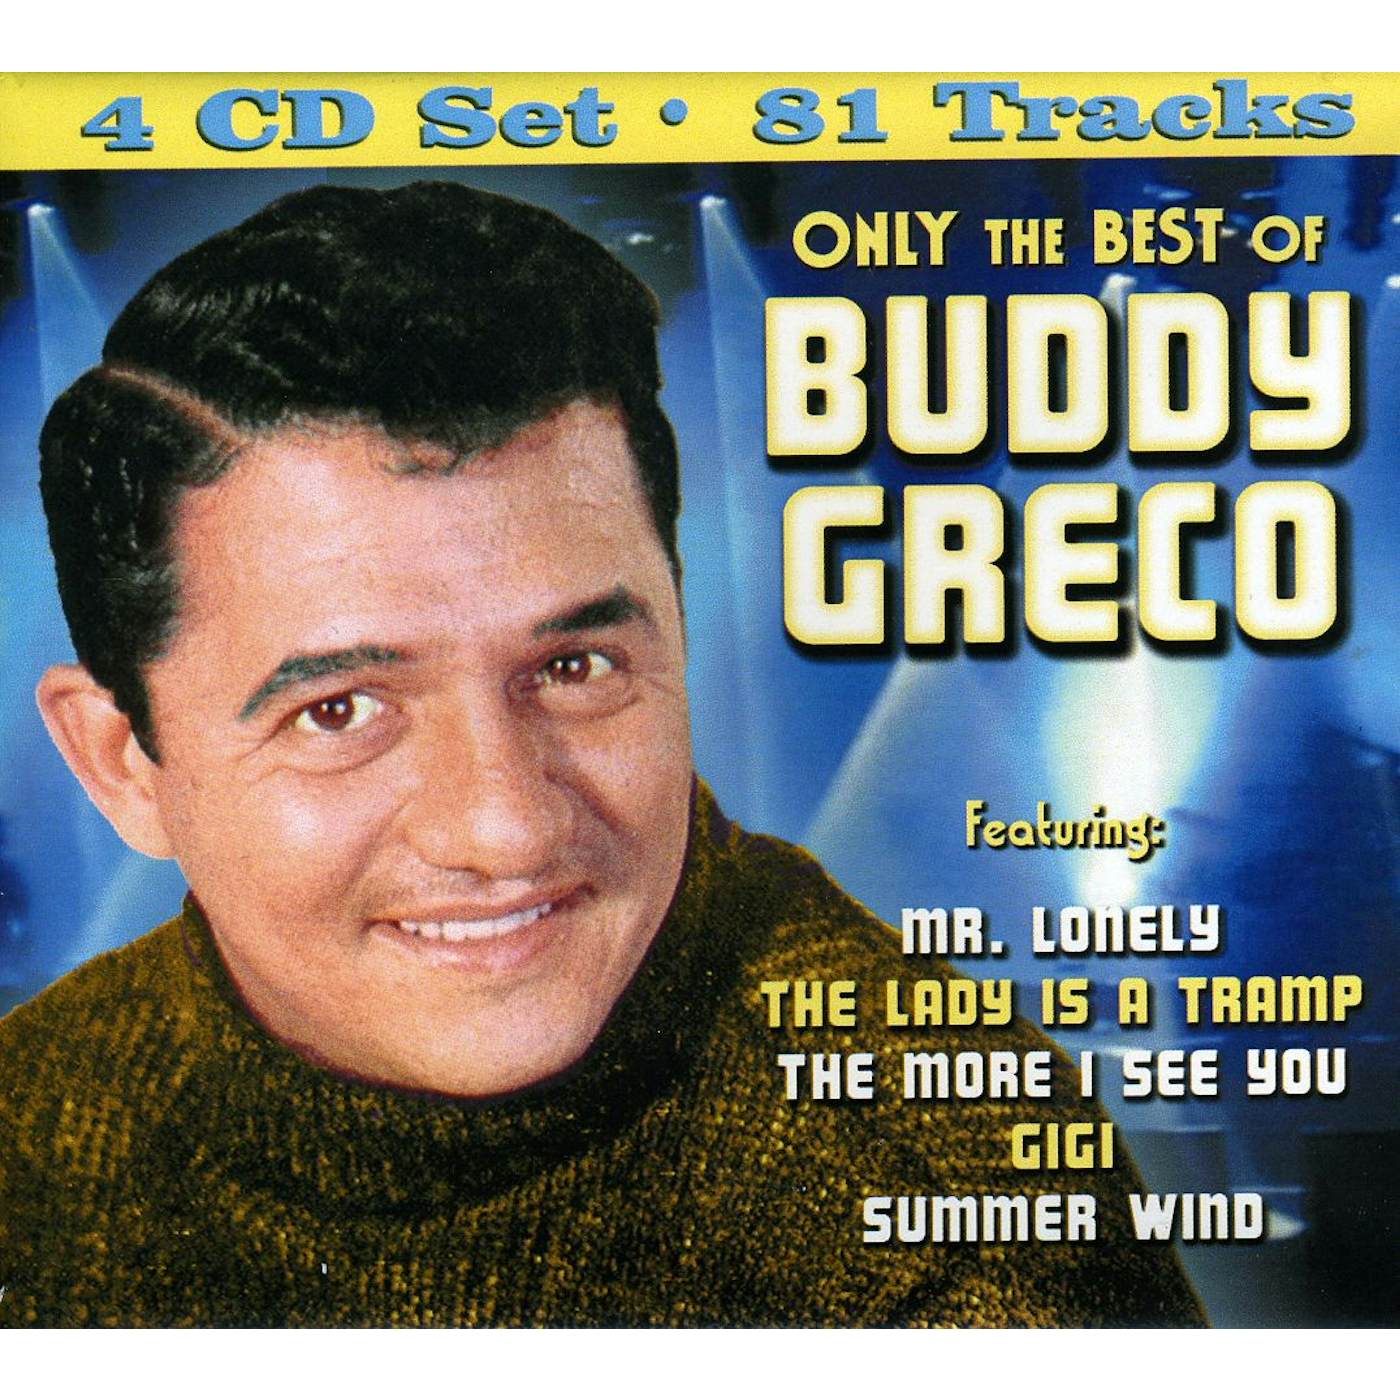 ONLY THE BEST OF BUDDY GRECO CD